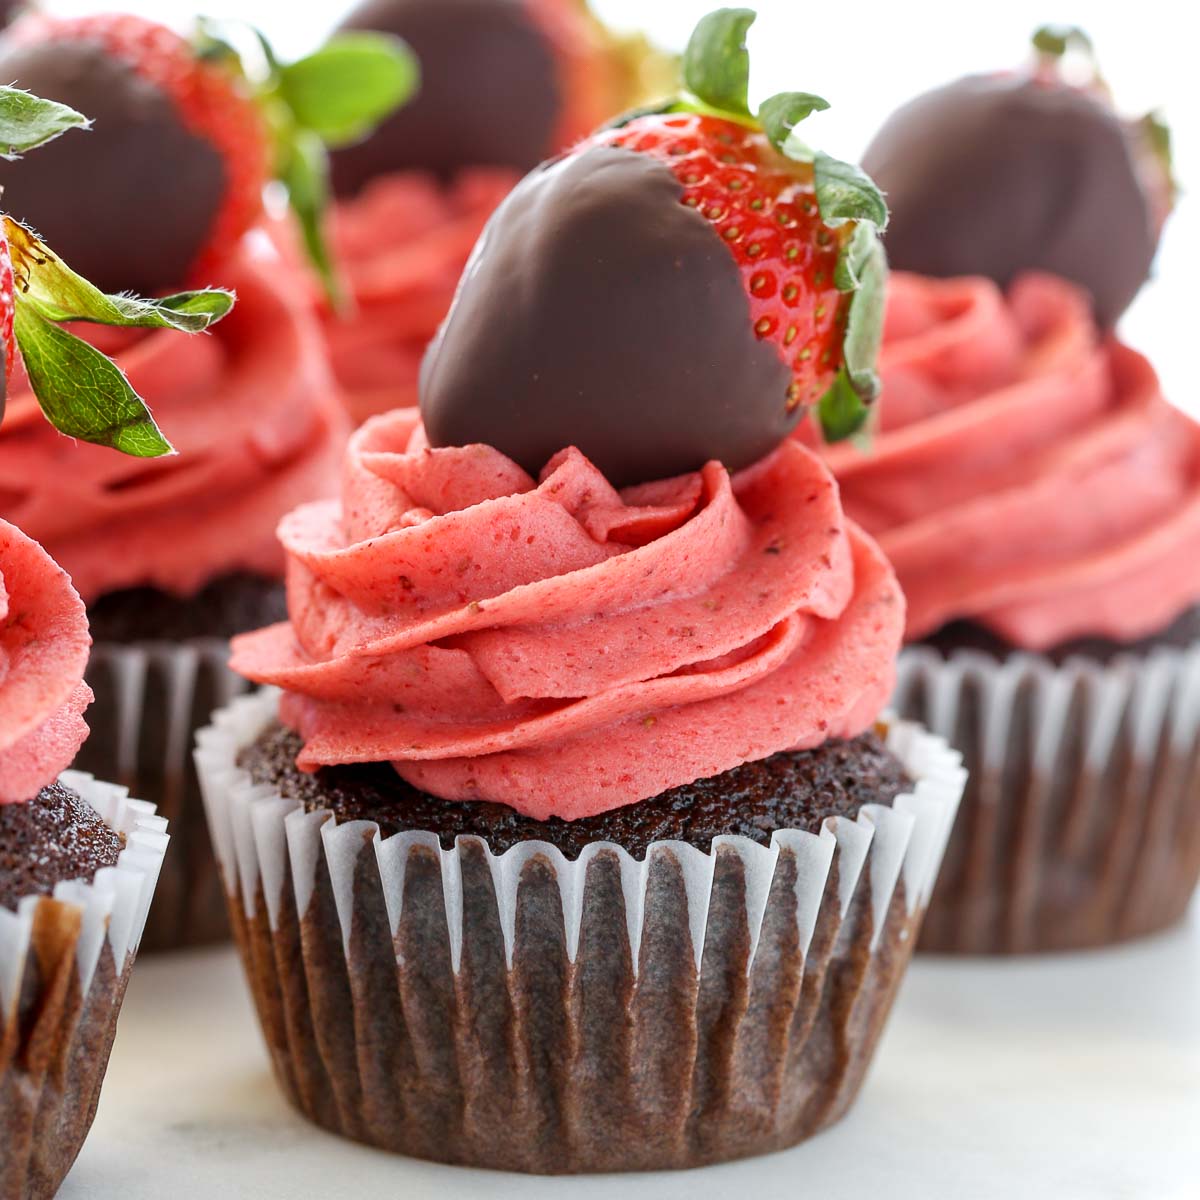 Chocolate Covered Strawberry Cupcakes Live Well Bake Often